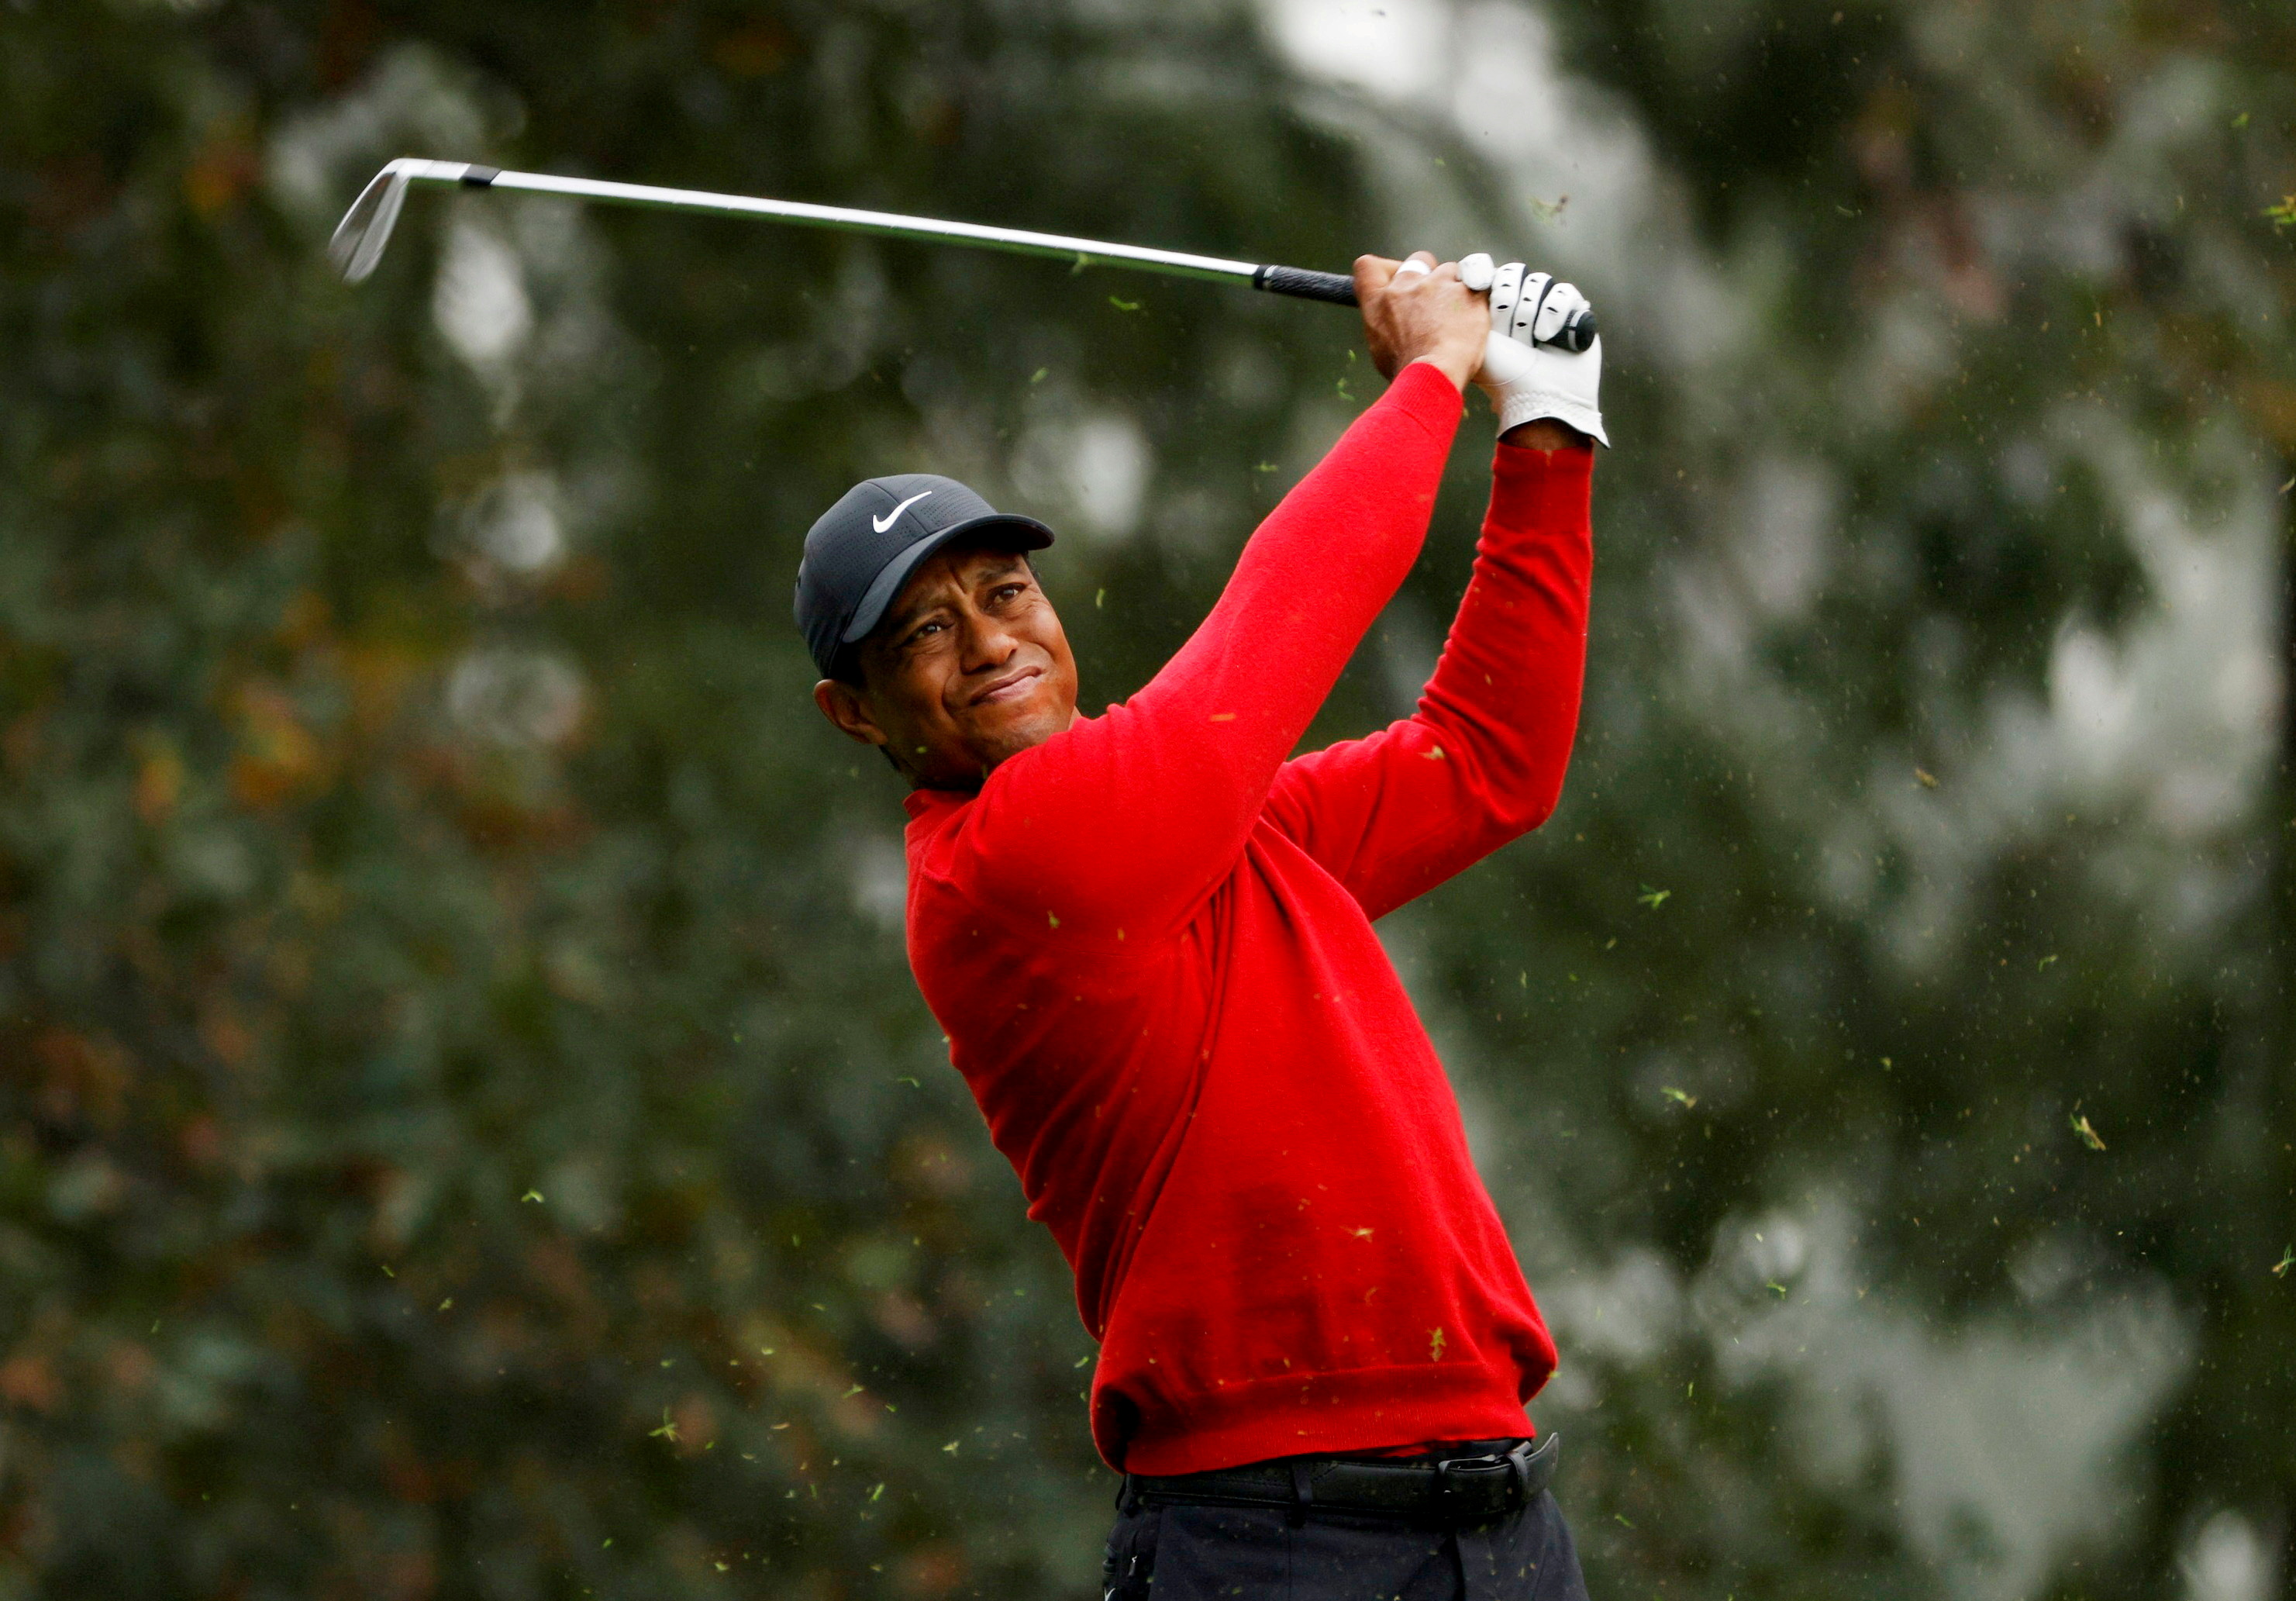 Golf - The Masters - Augusta National Golf Club - Augusta, Georgia, U.S. - November 15, 2020 Tiger Woods of the U.S. on the 4th hole during the final round REUTERS/Mike Segar